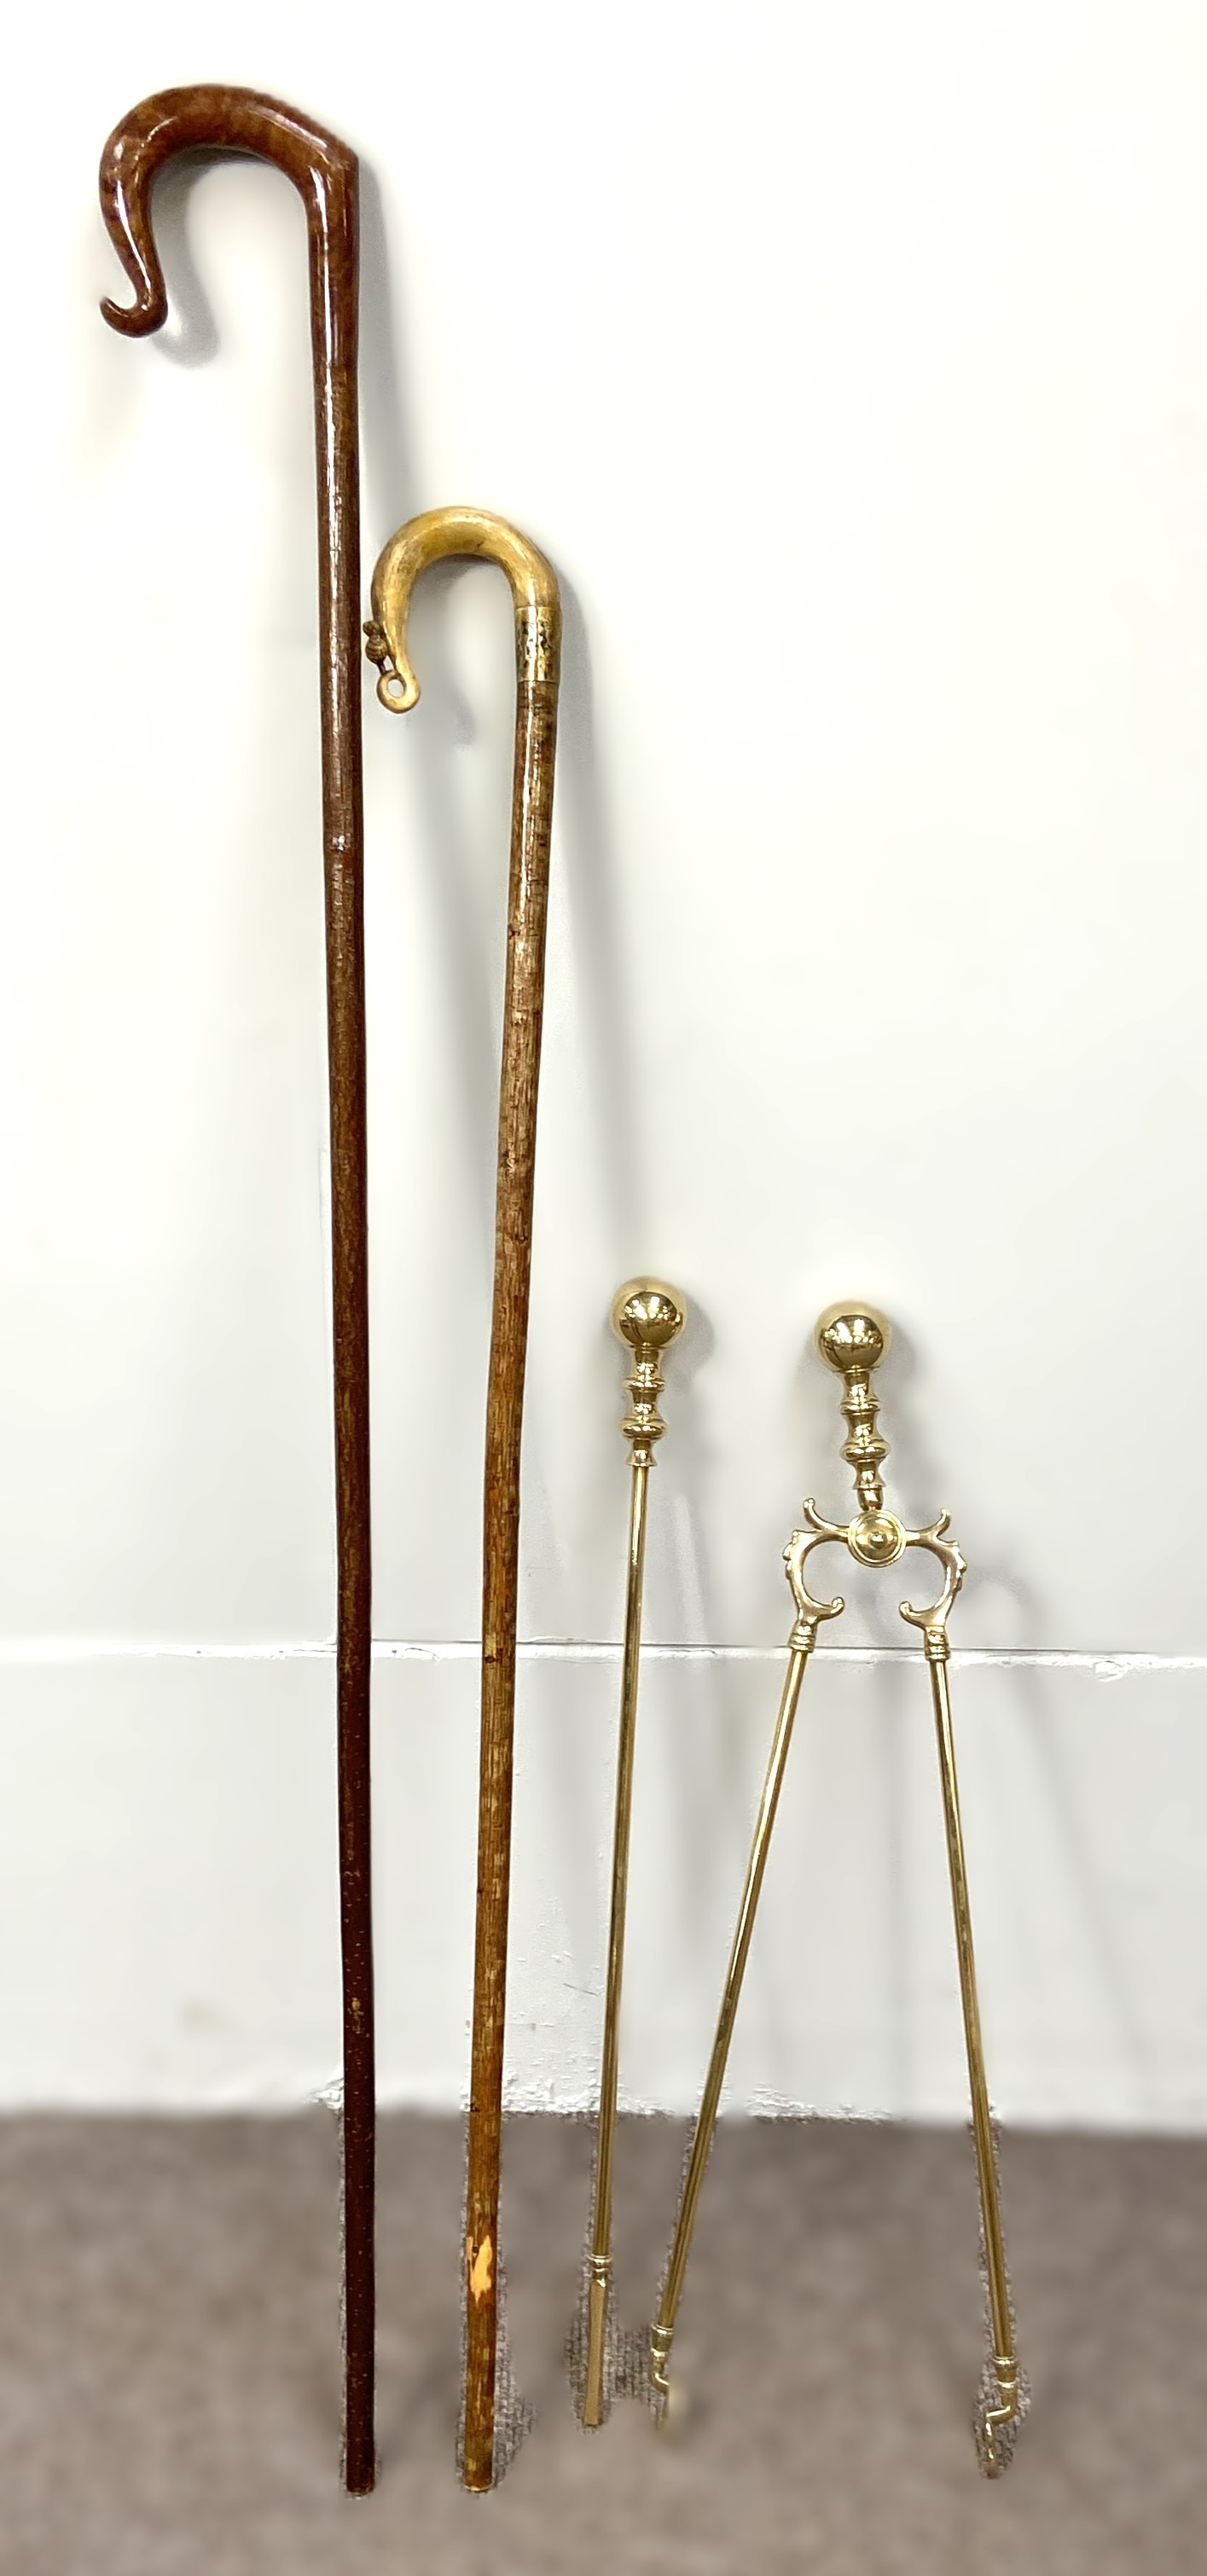 Two Scottish walking sticks, one with a carved horn handle, decorated with a thistle, the other of